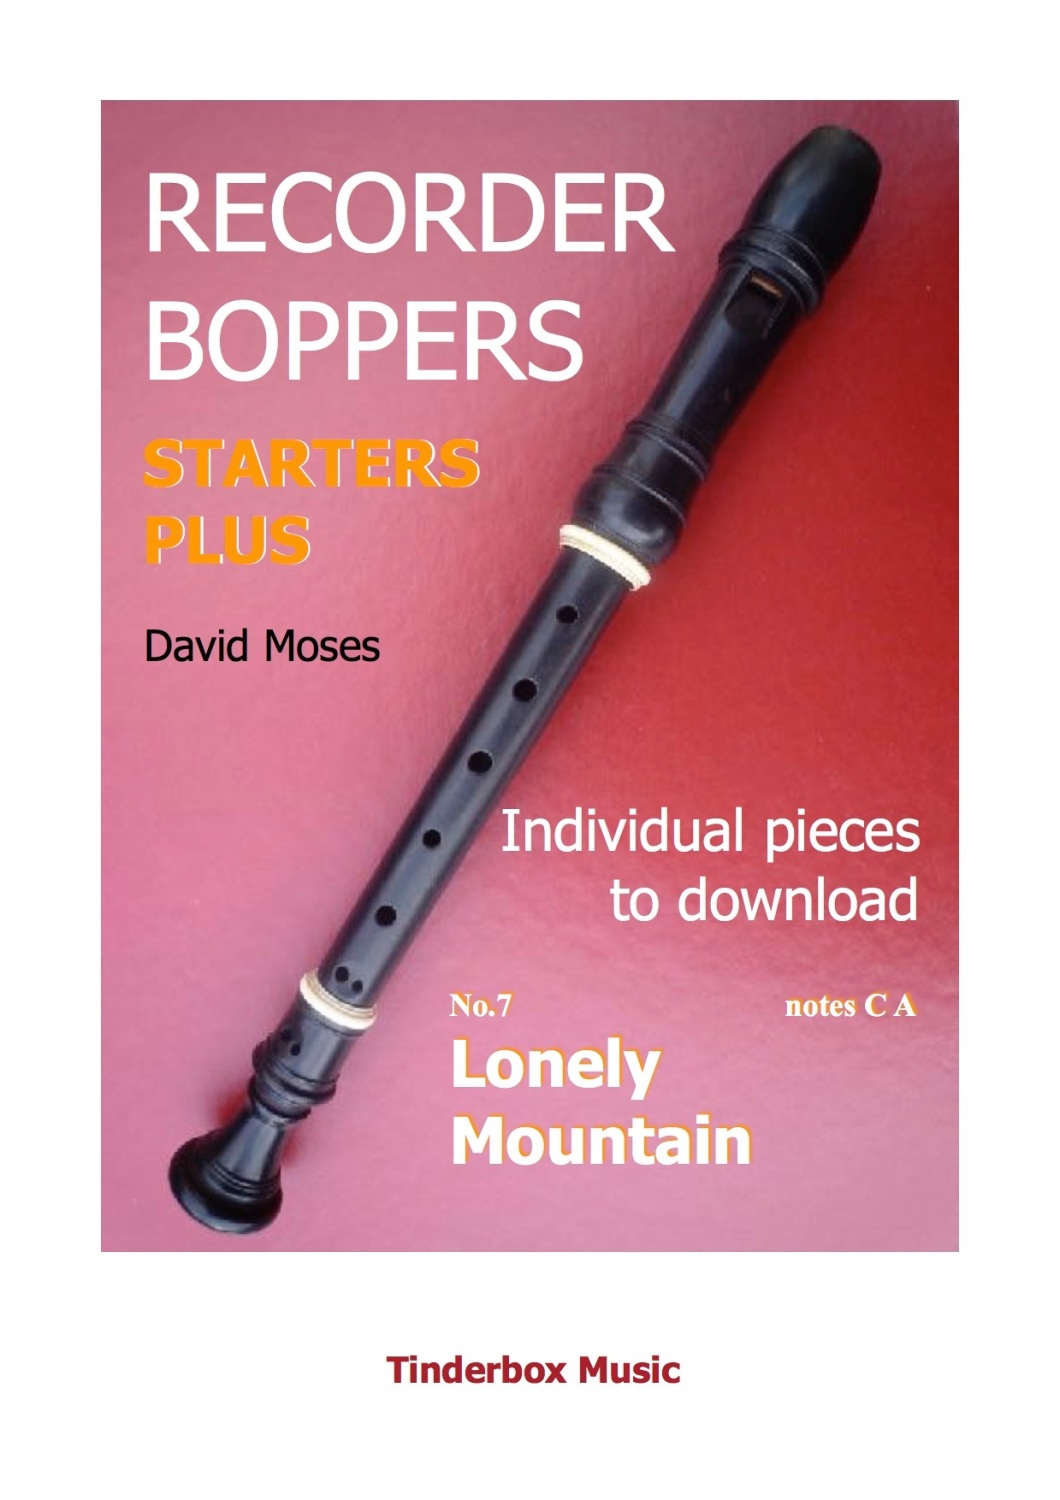 STARTERS PLUS individual pieces no.7  LONELY MOUNTAIN download